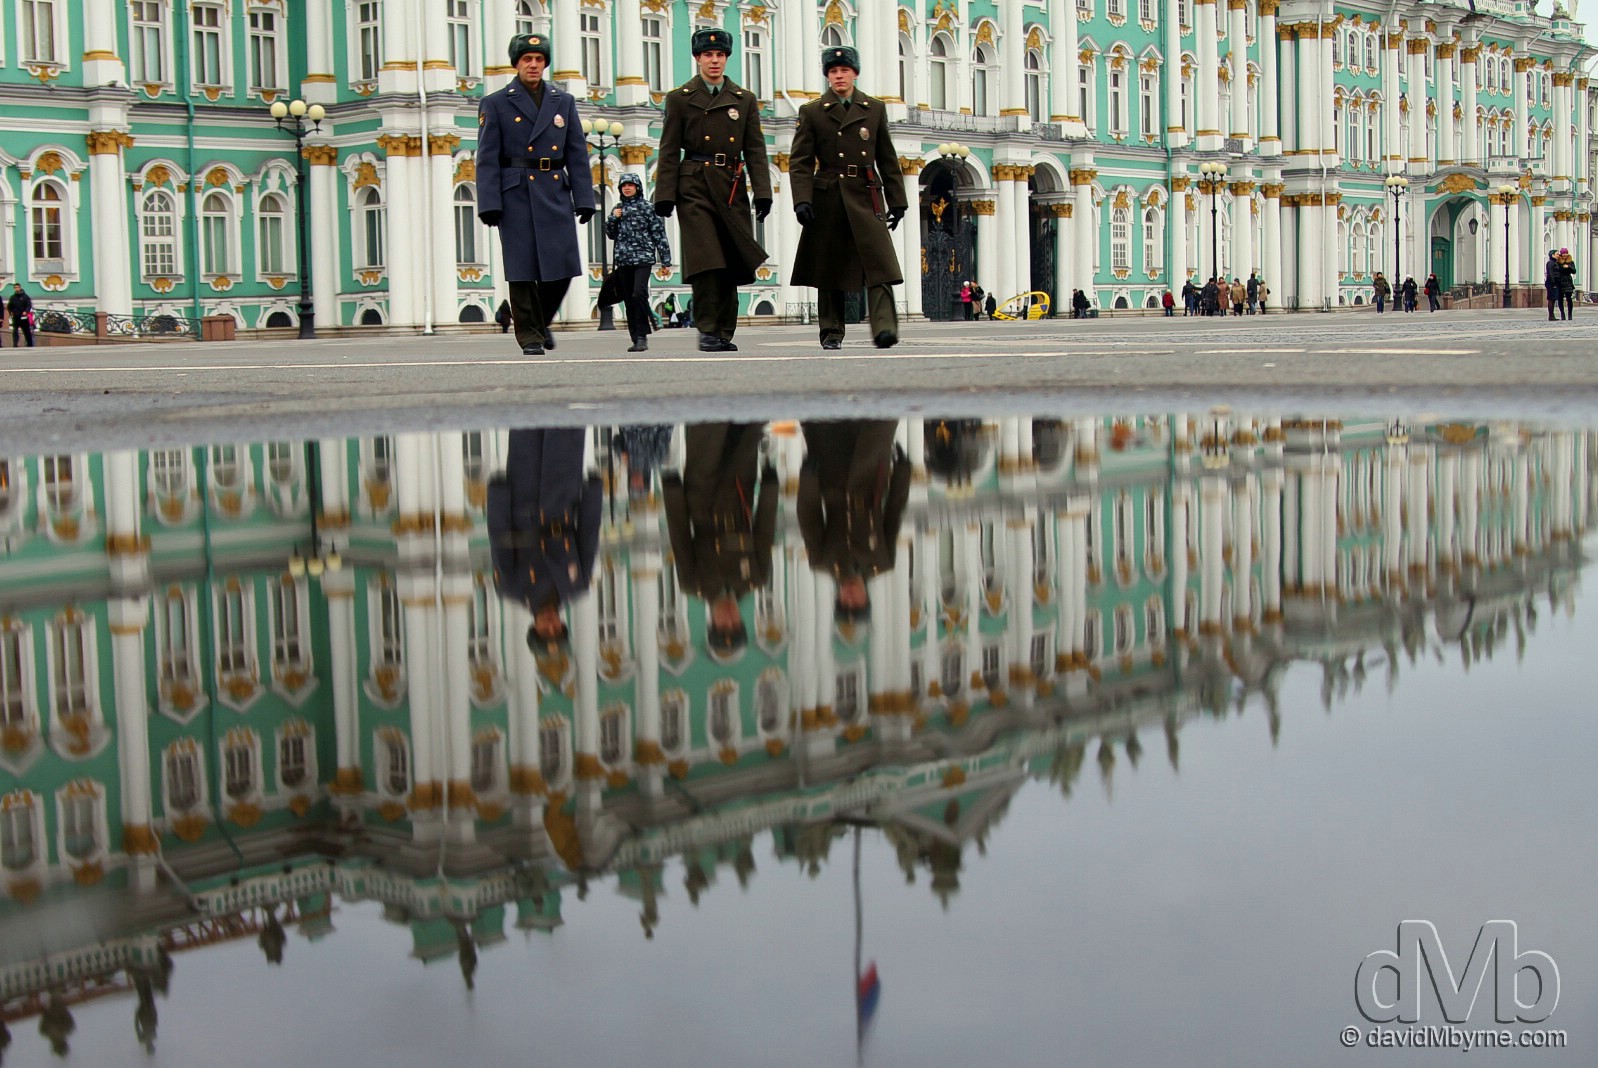 Reflections of the facade of the Winter Palace in  Palace Square, St Petersburg, Russia. November 2012 (EOS 60D || 